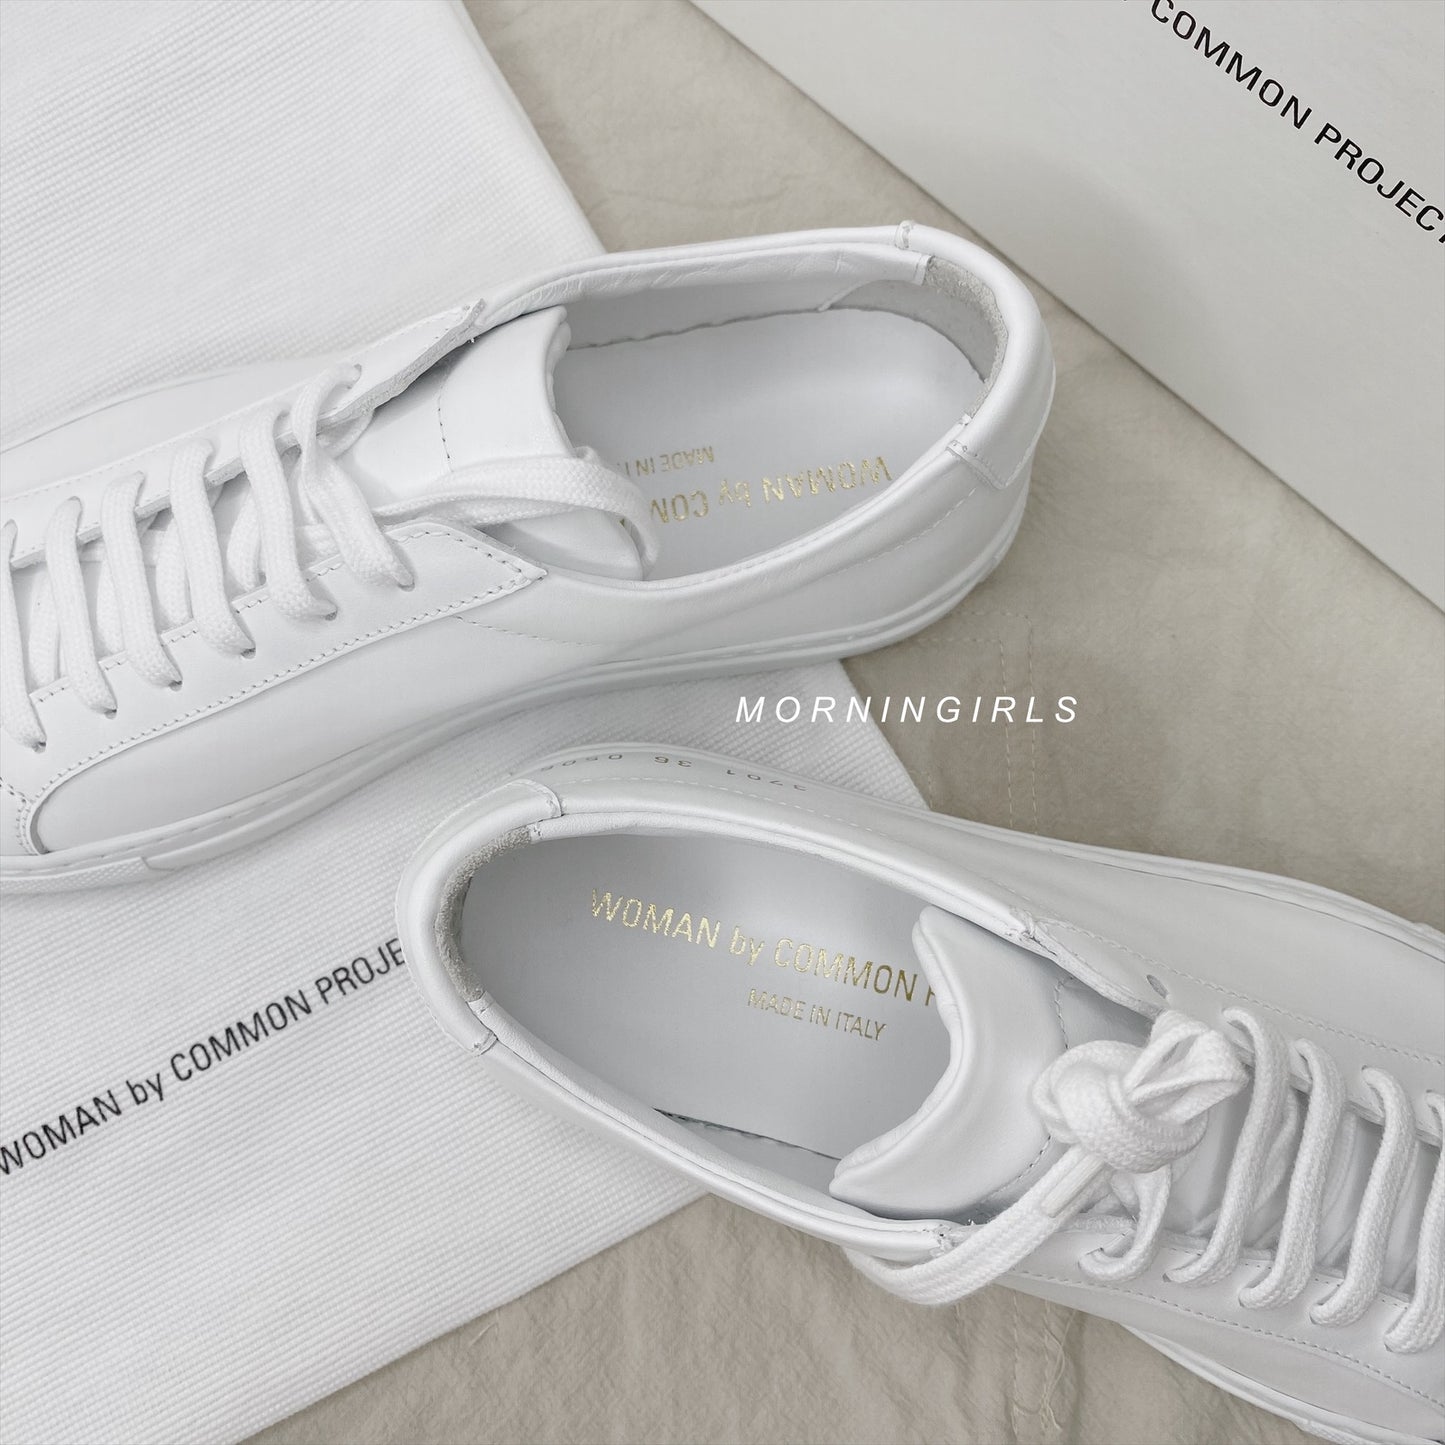 Common Projects 小白鞋 3701 女裝 ［新年優惠中 !!!￼］